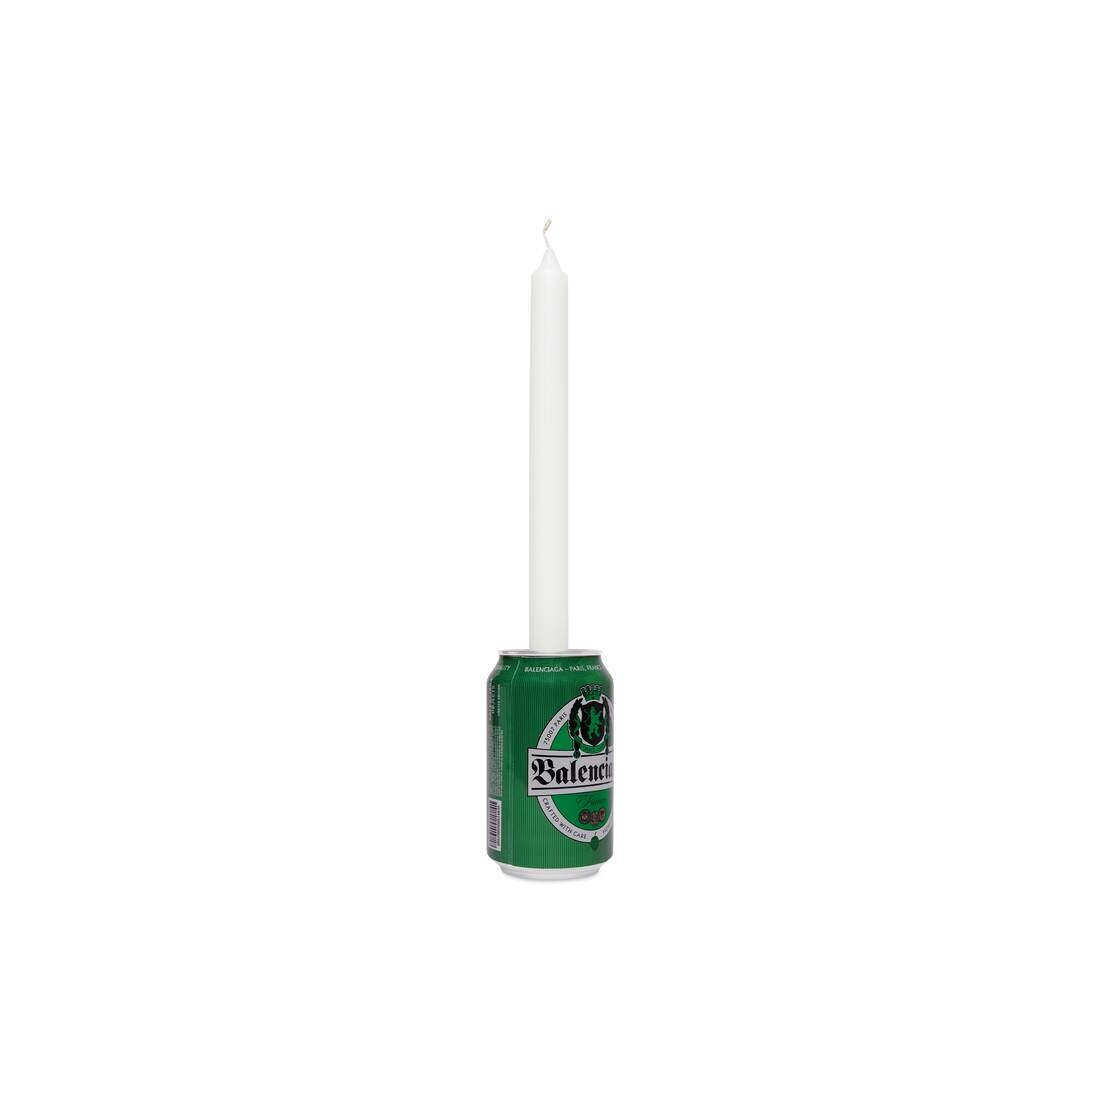 Drink Candle Holder in Green - 2